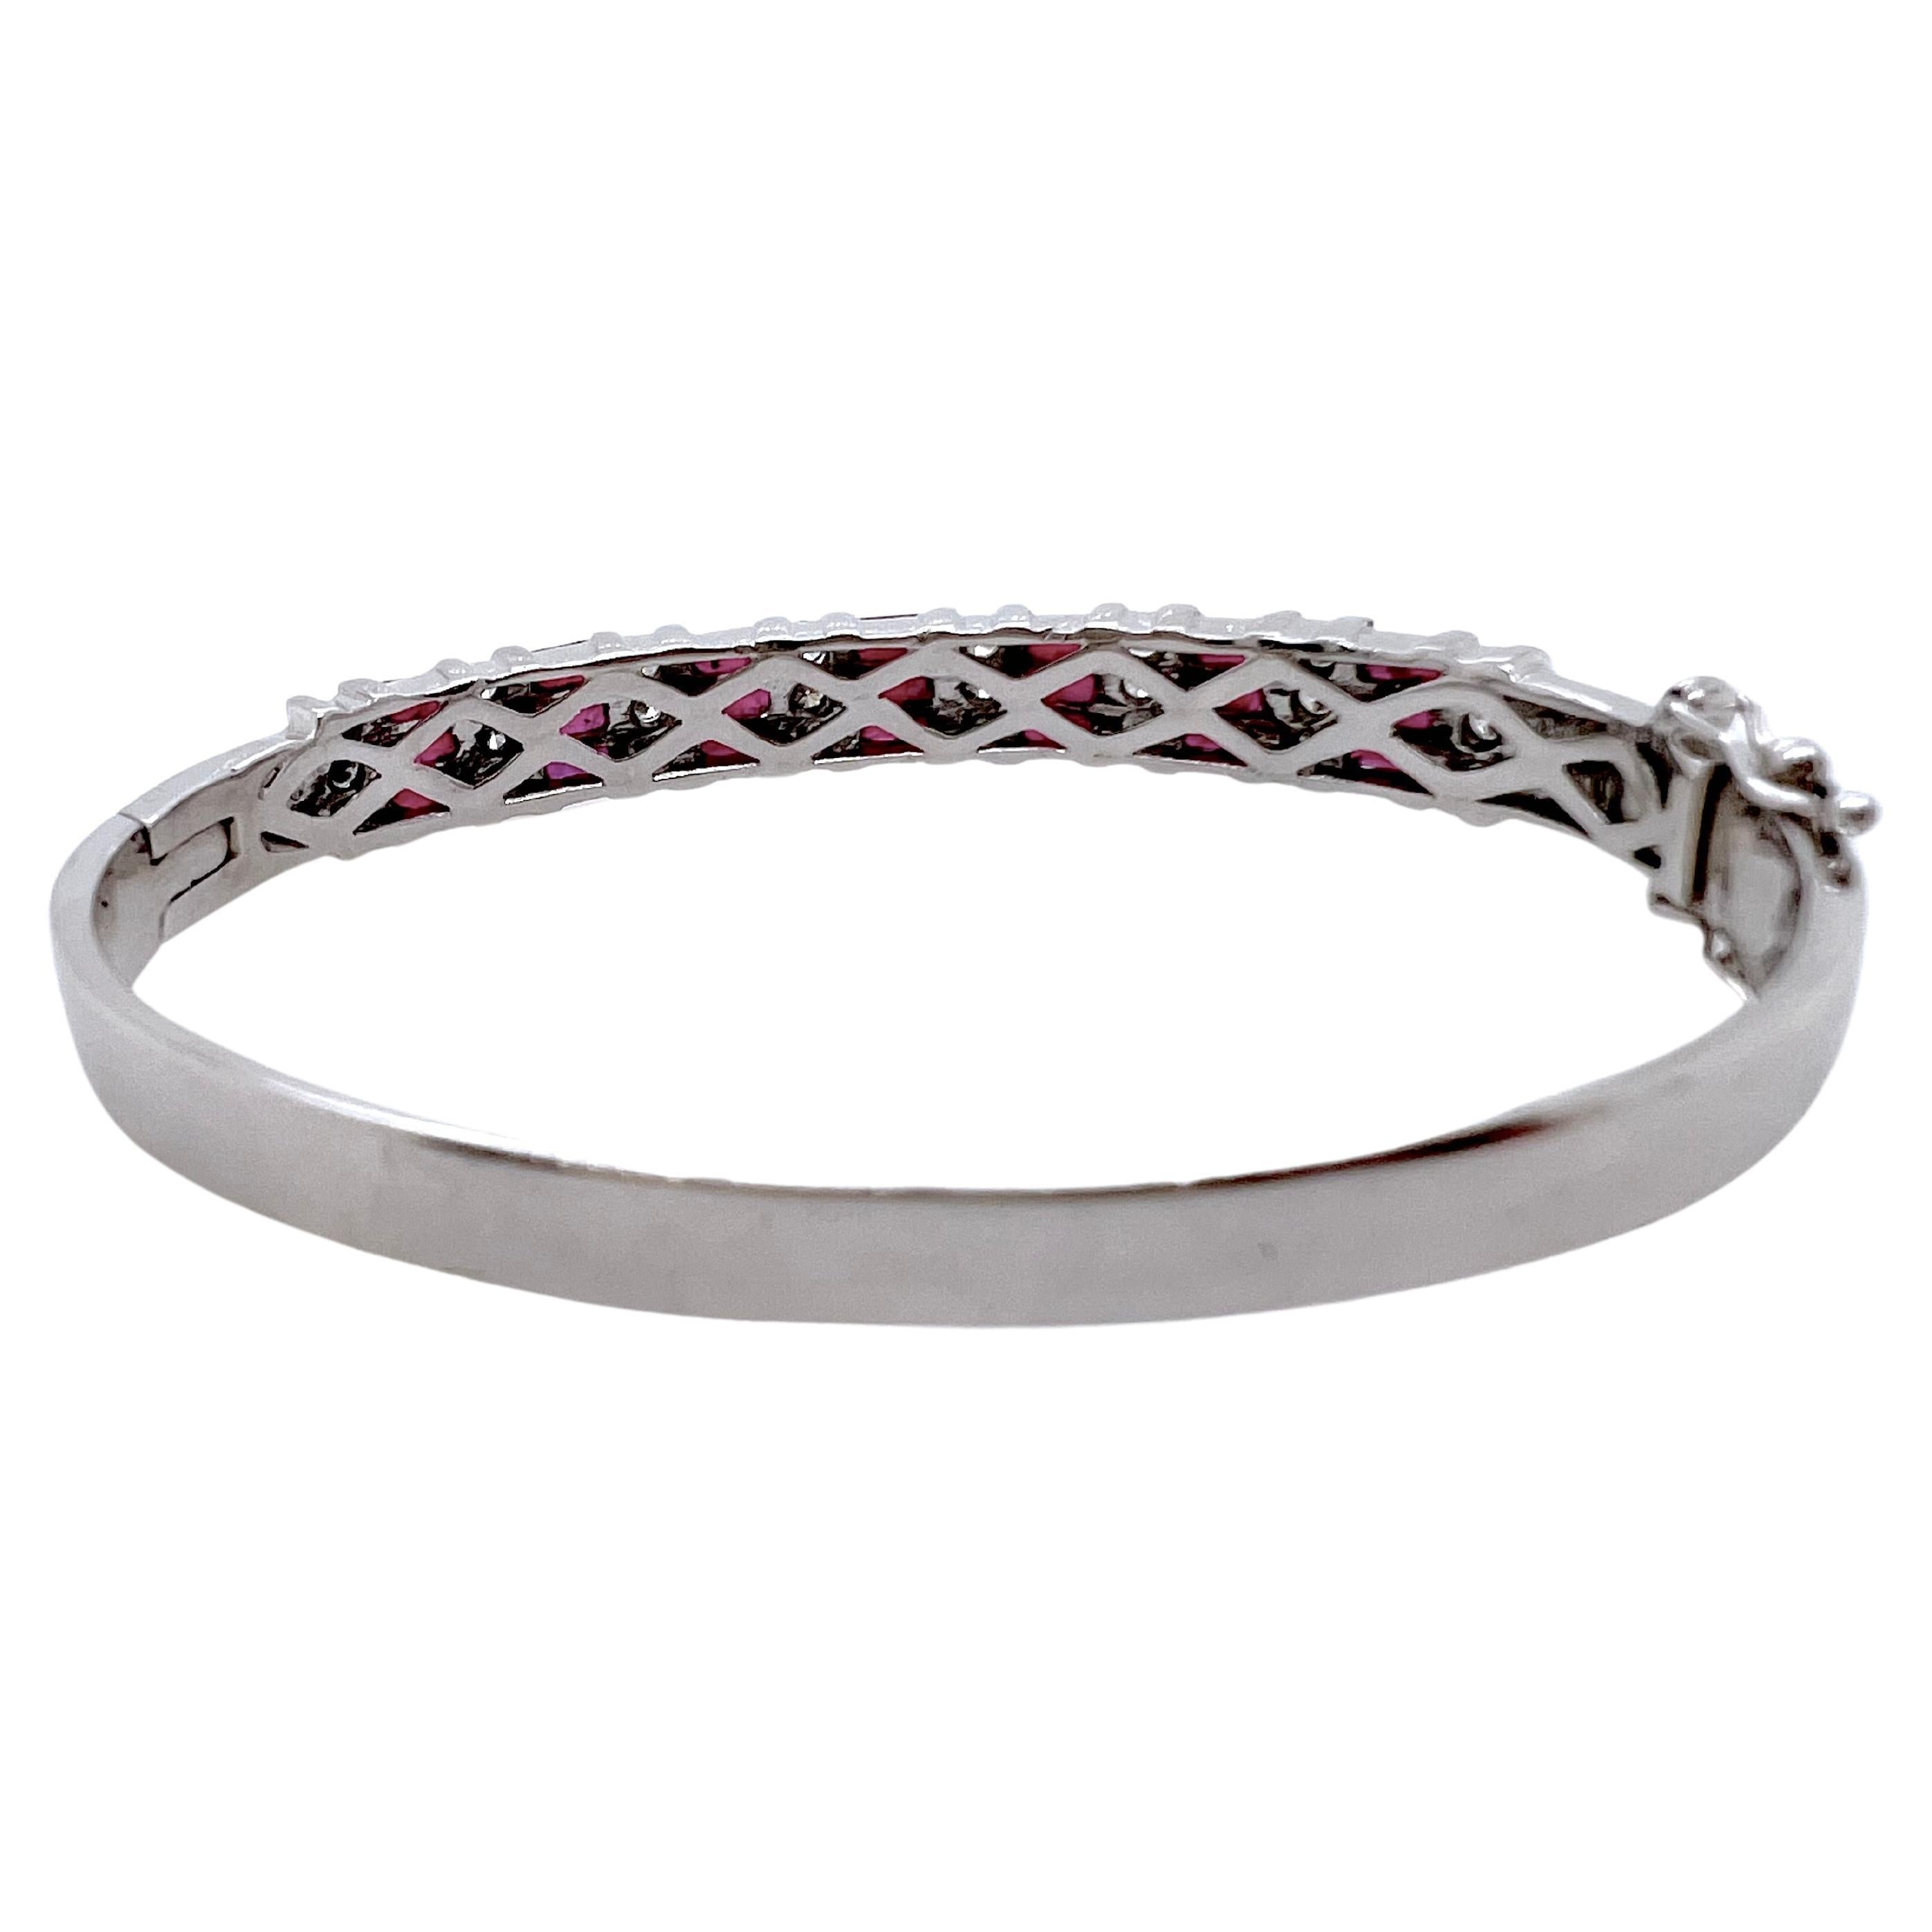 This iconic bangle is made in 14k white gold and has ruby baguettes channeled set along with round diamonds channeled set.  Each section has 3 baguettes followed by 3 round diamonds which makes it symmetrical.  It is perfect for smart casual events